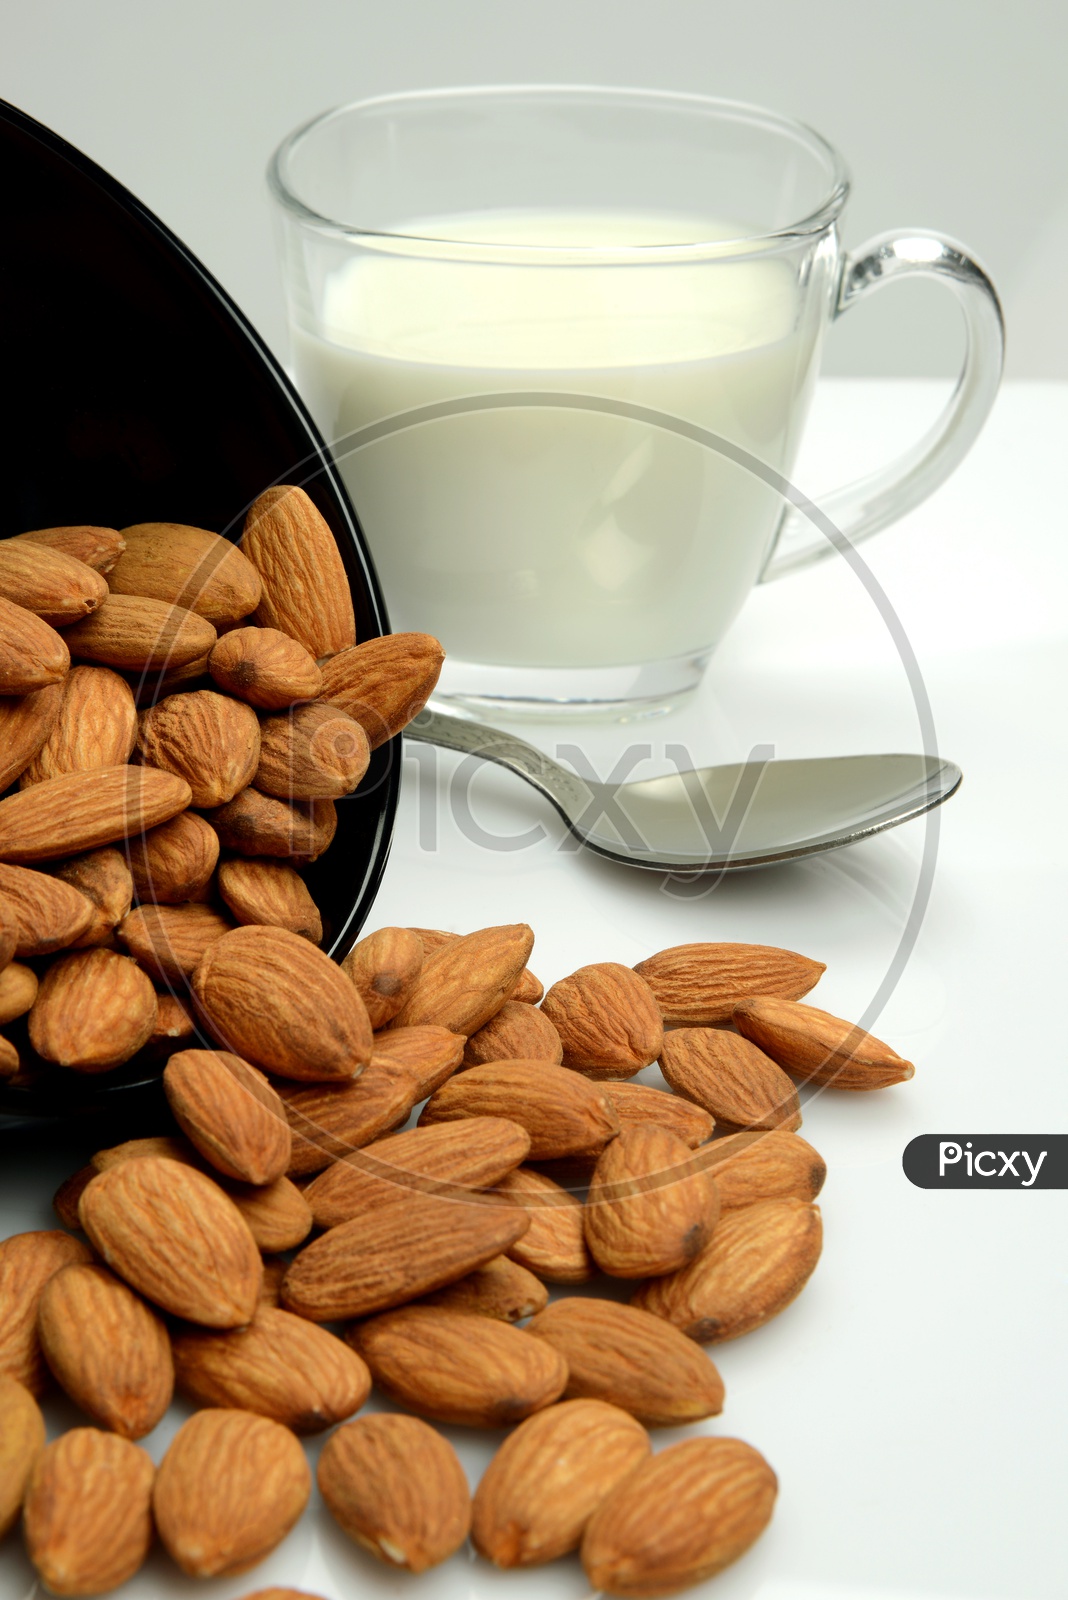 Healthy food, Dryfruit Almond Seeds in a bowl and a cup of fresh milk